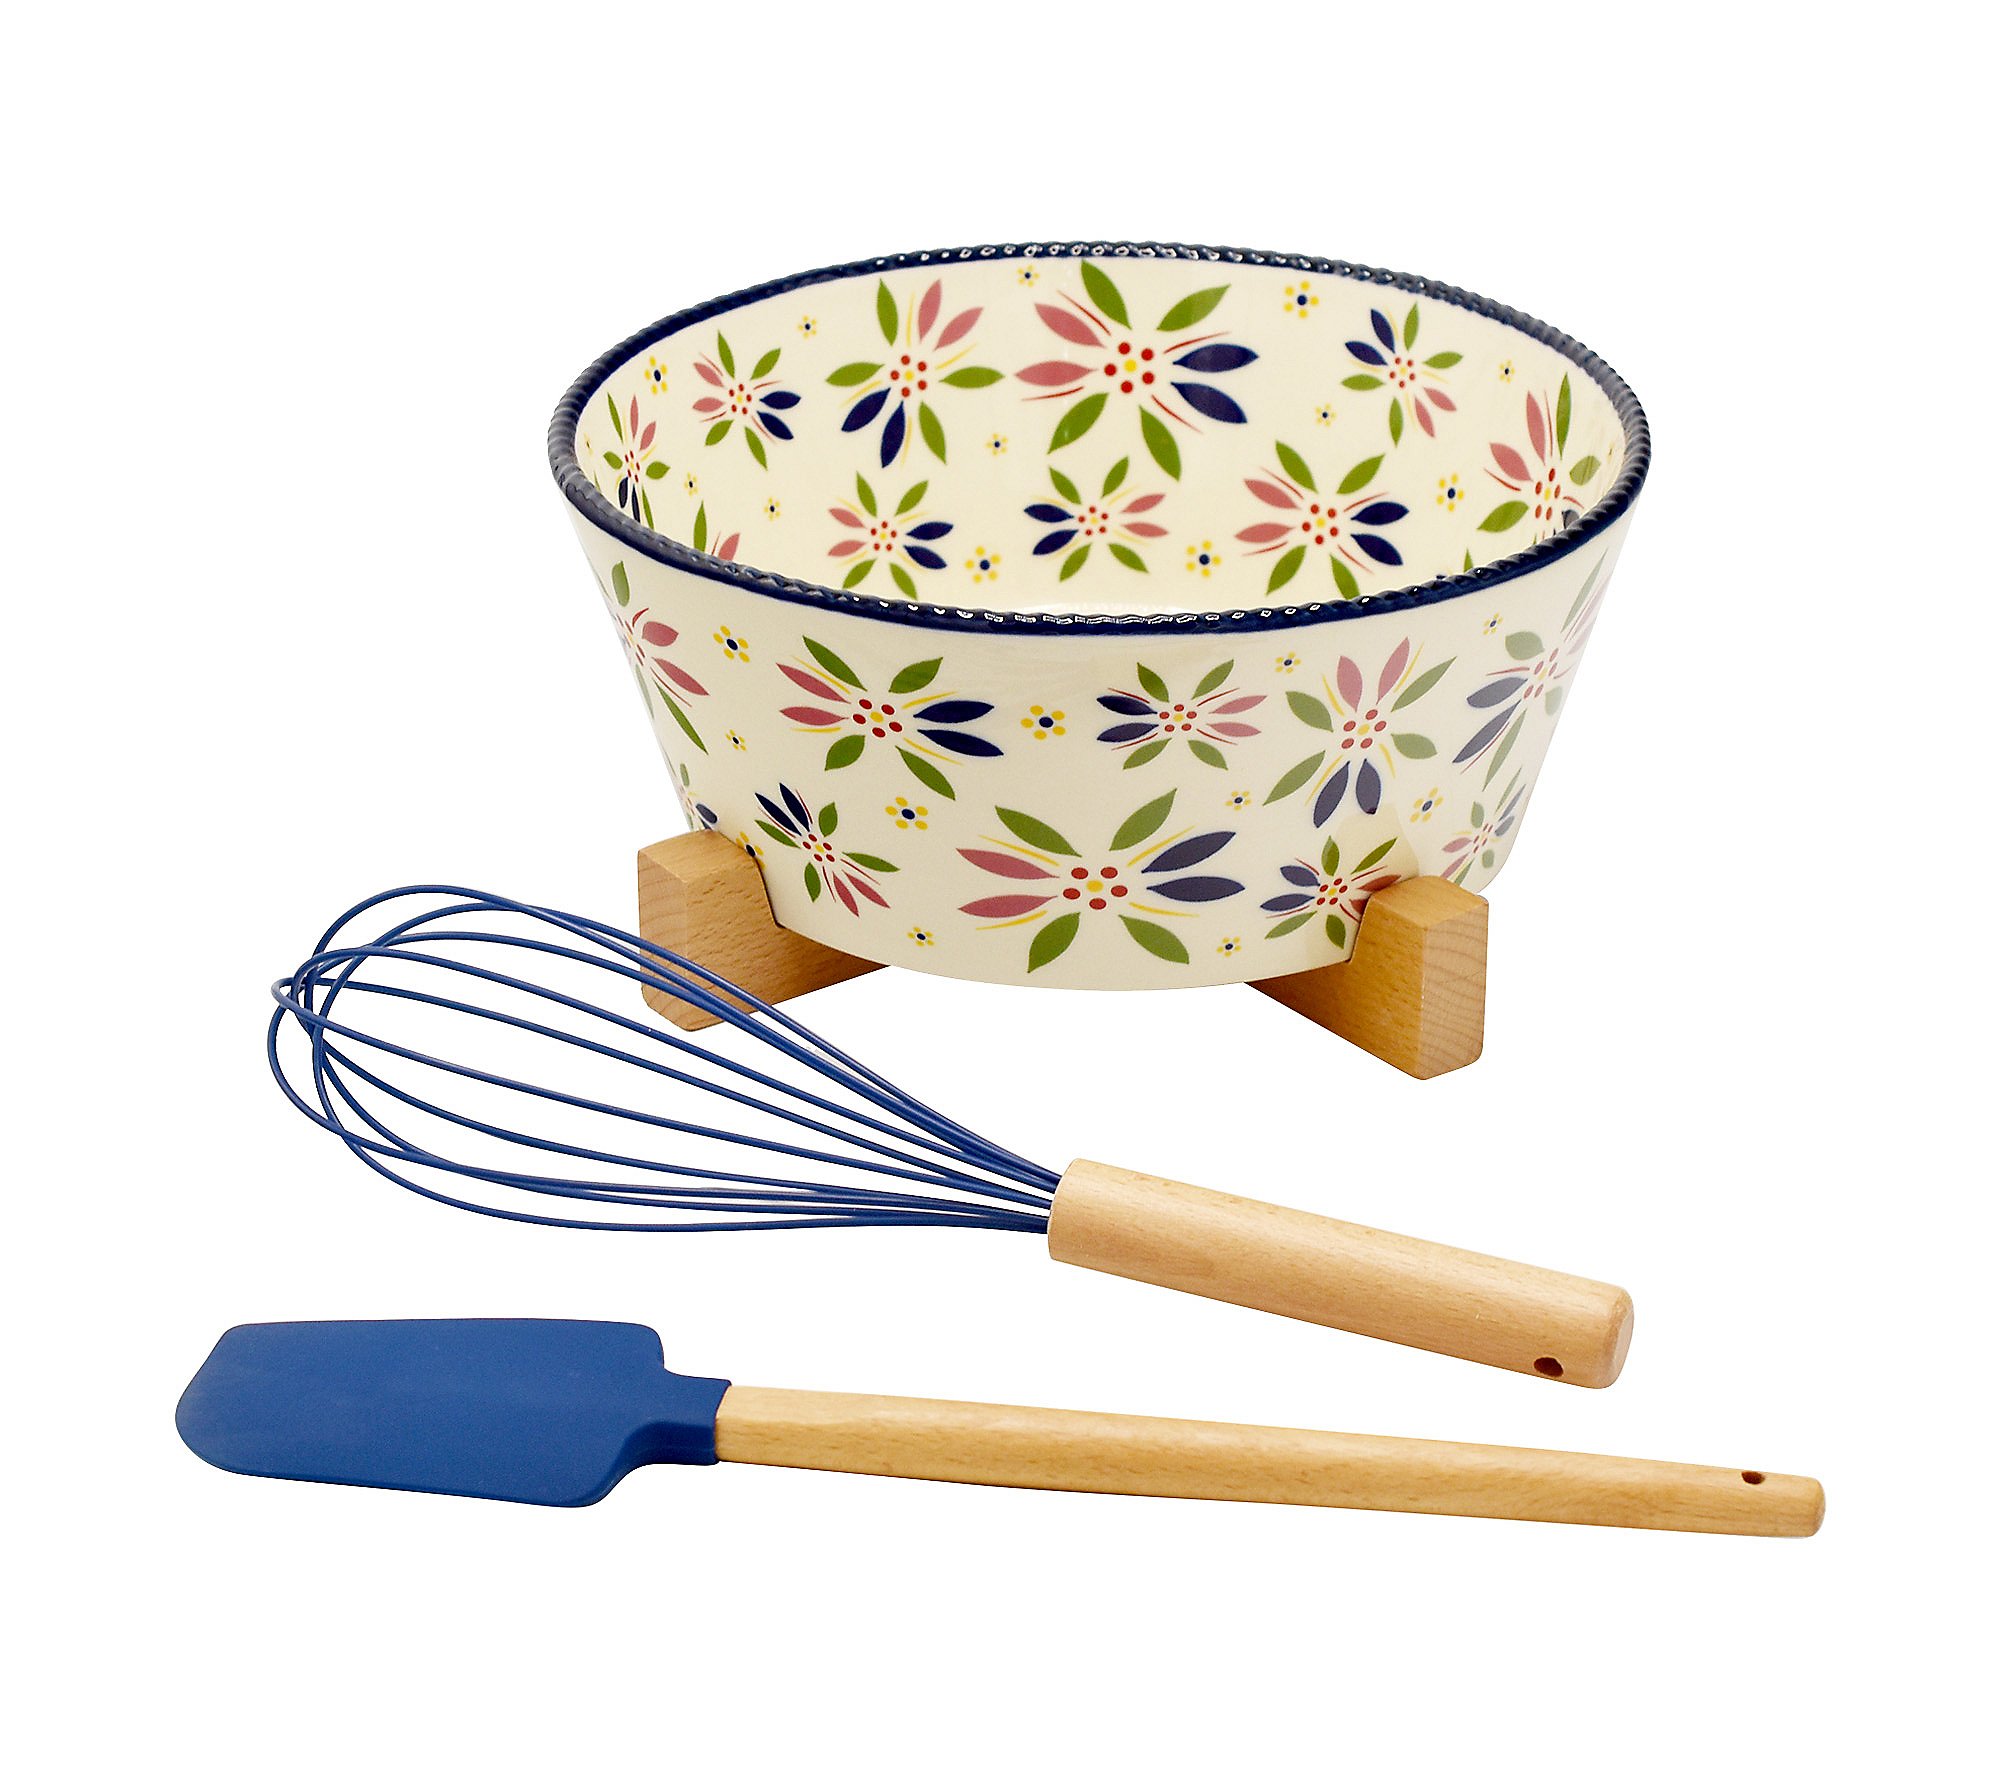 Temp-tations Old World 3-qt Bowl with Whisk， Trivet and Spatula